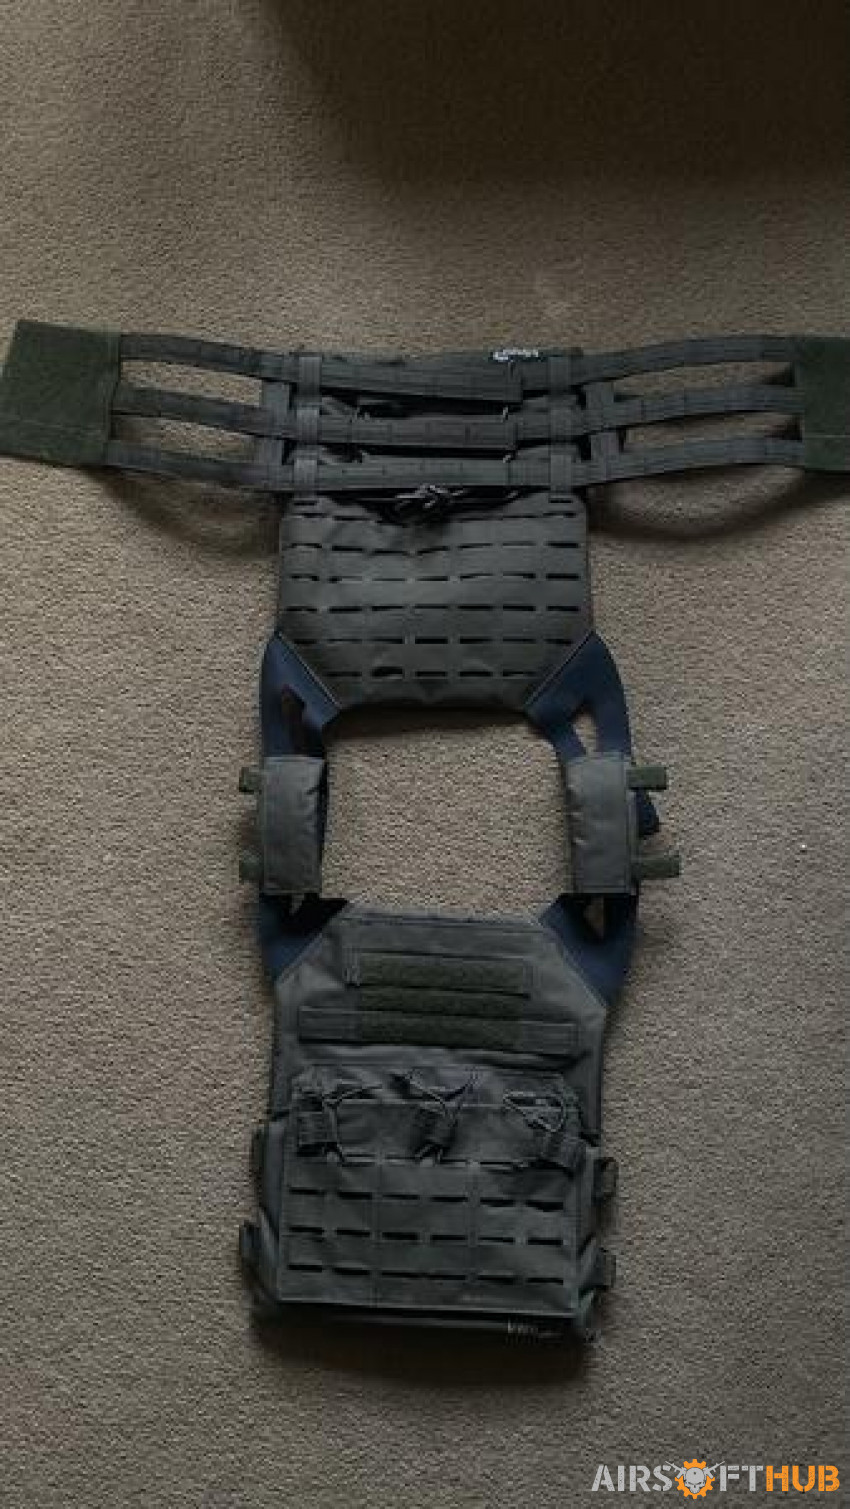 Green viper plate carrier - Used airsoft equipment